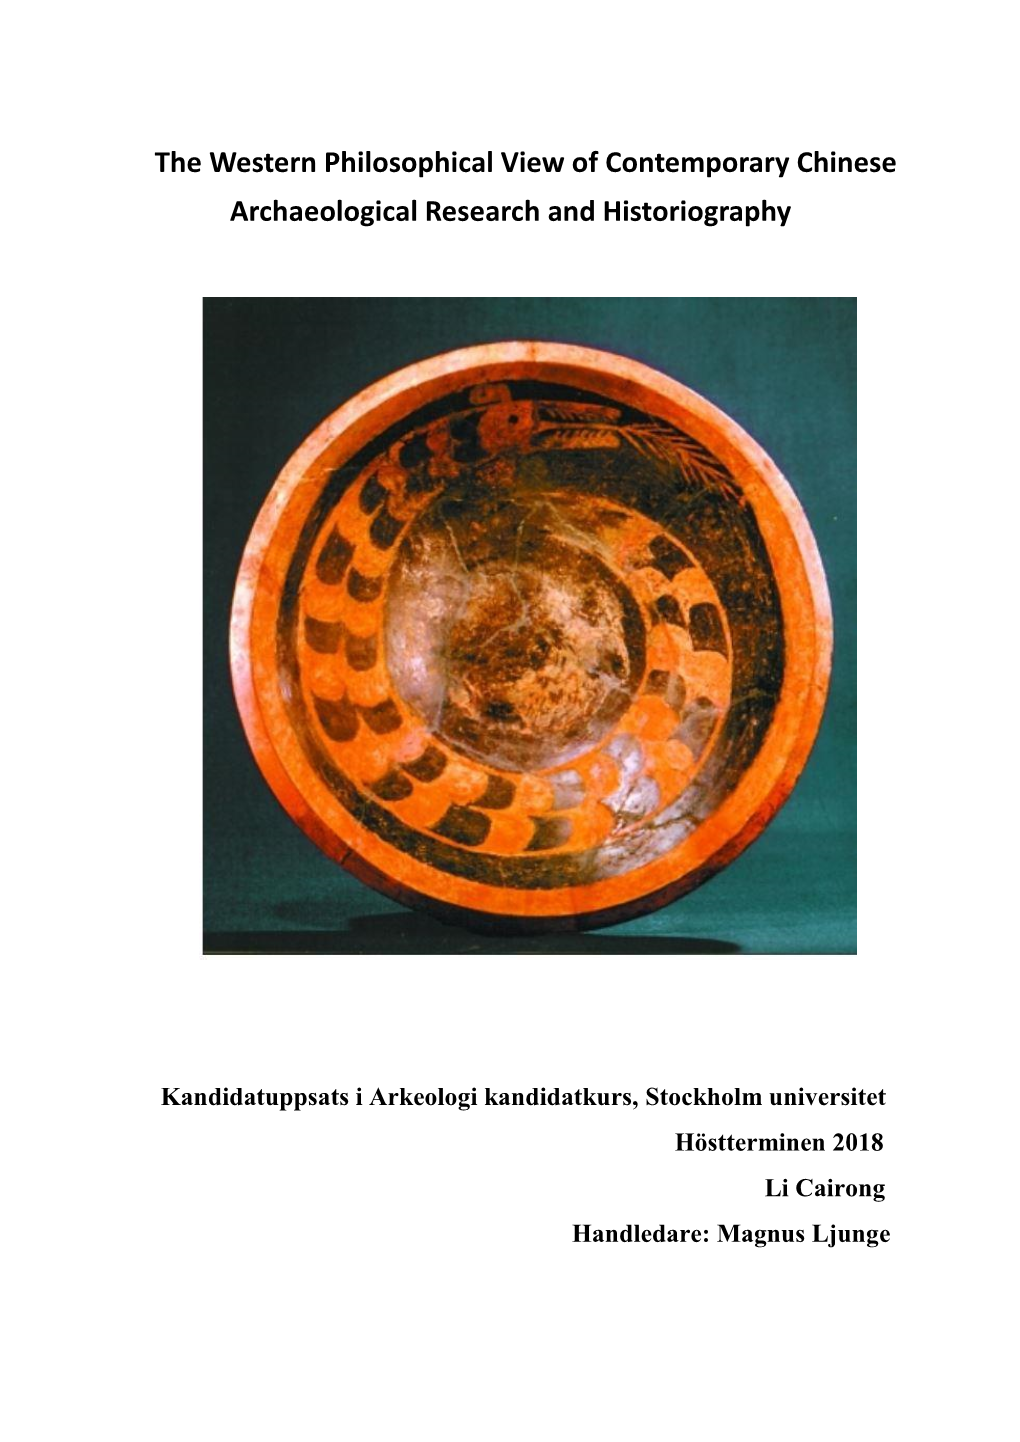 The Western Philosophical View of Contemporary Chinese Archaeological Research and Historiography